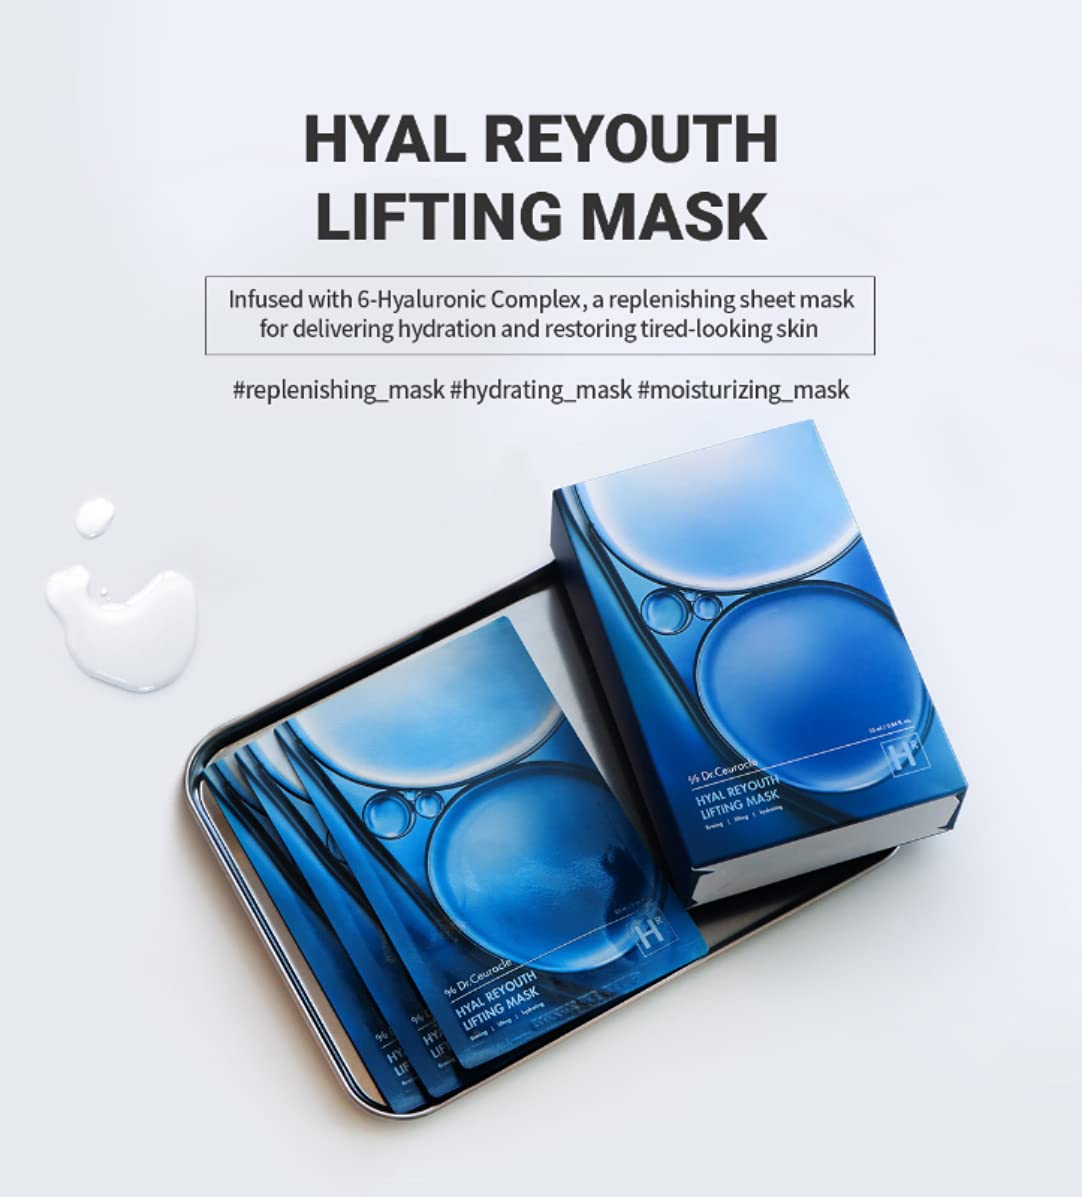 Dr Ceuracle Hyal Reyouth Lifting Mask - 25ml